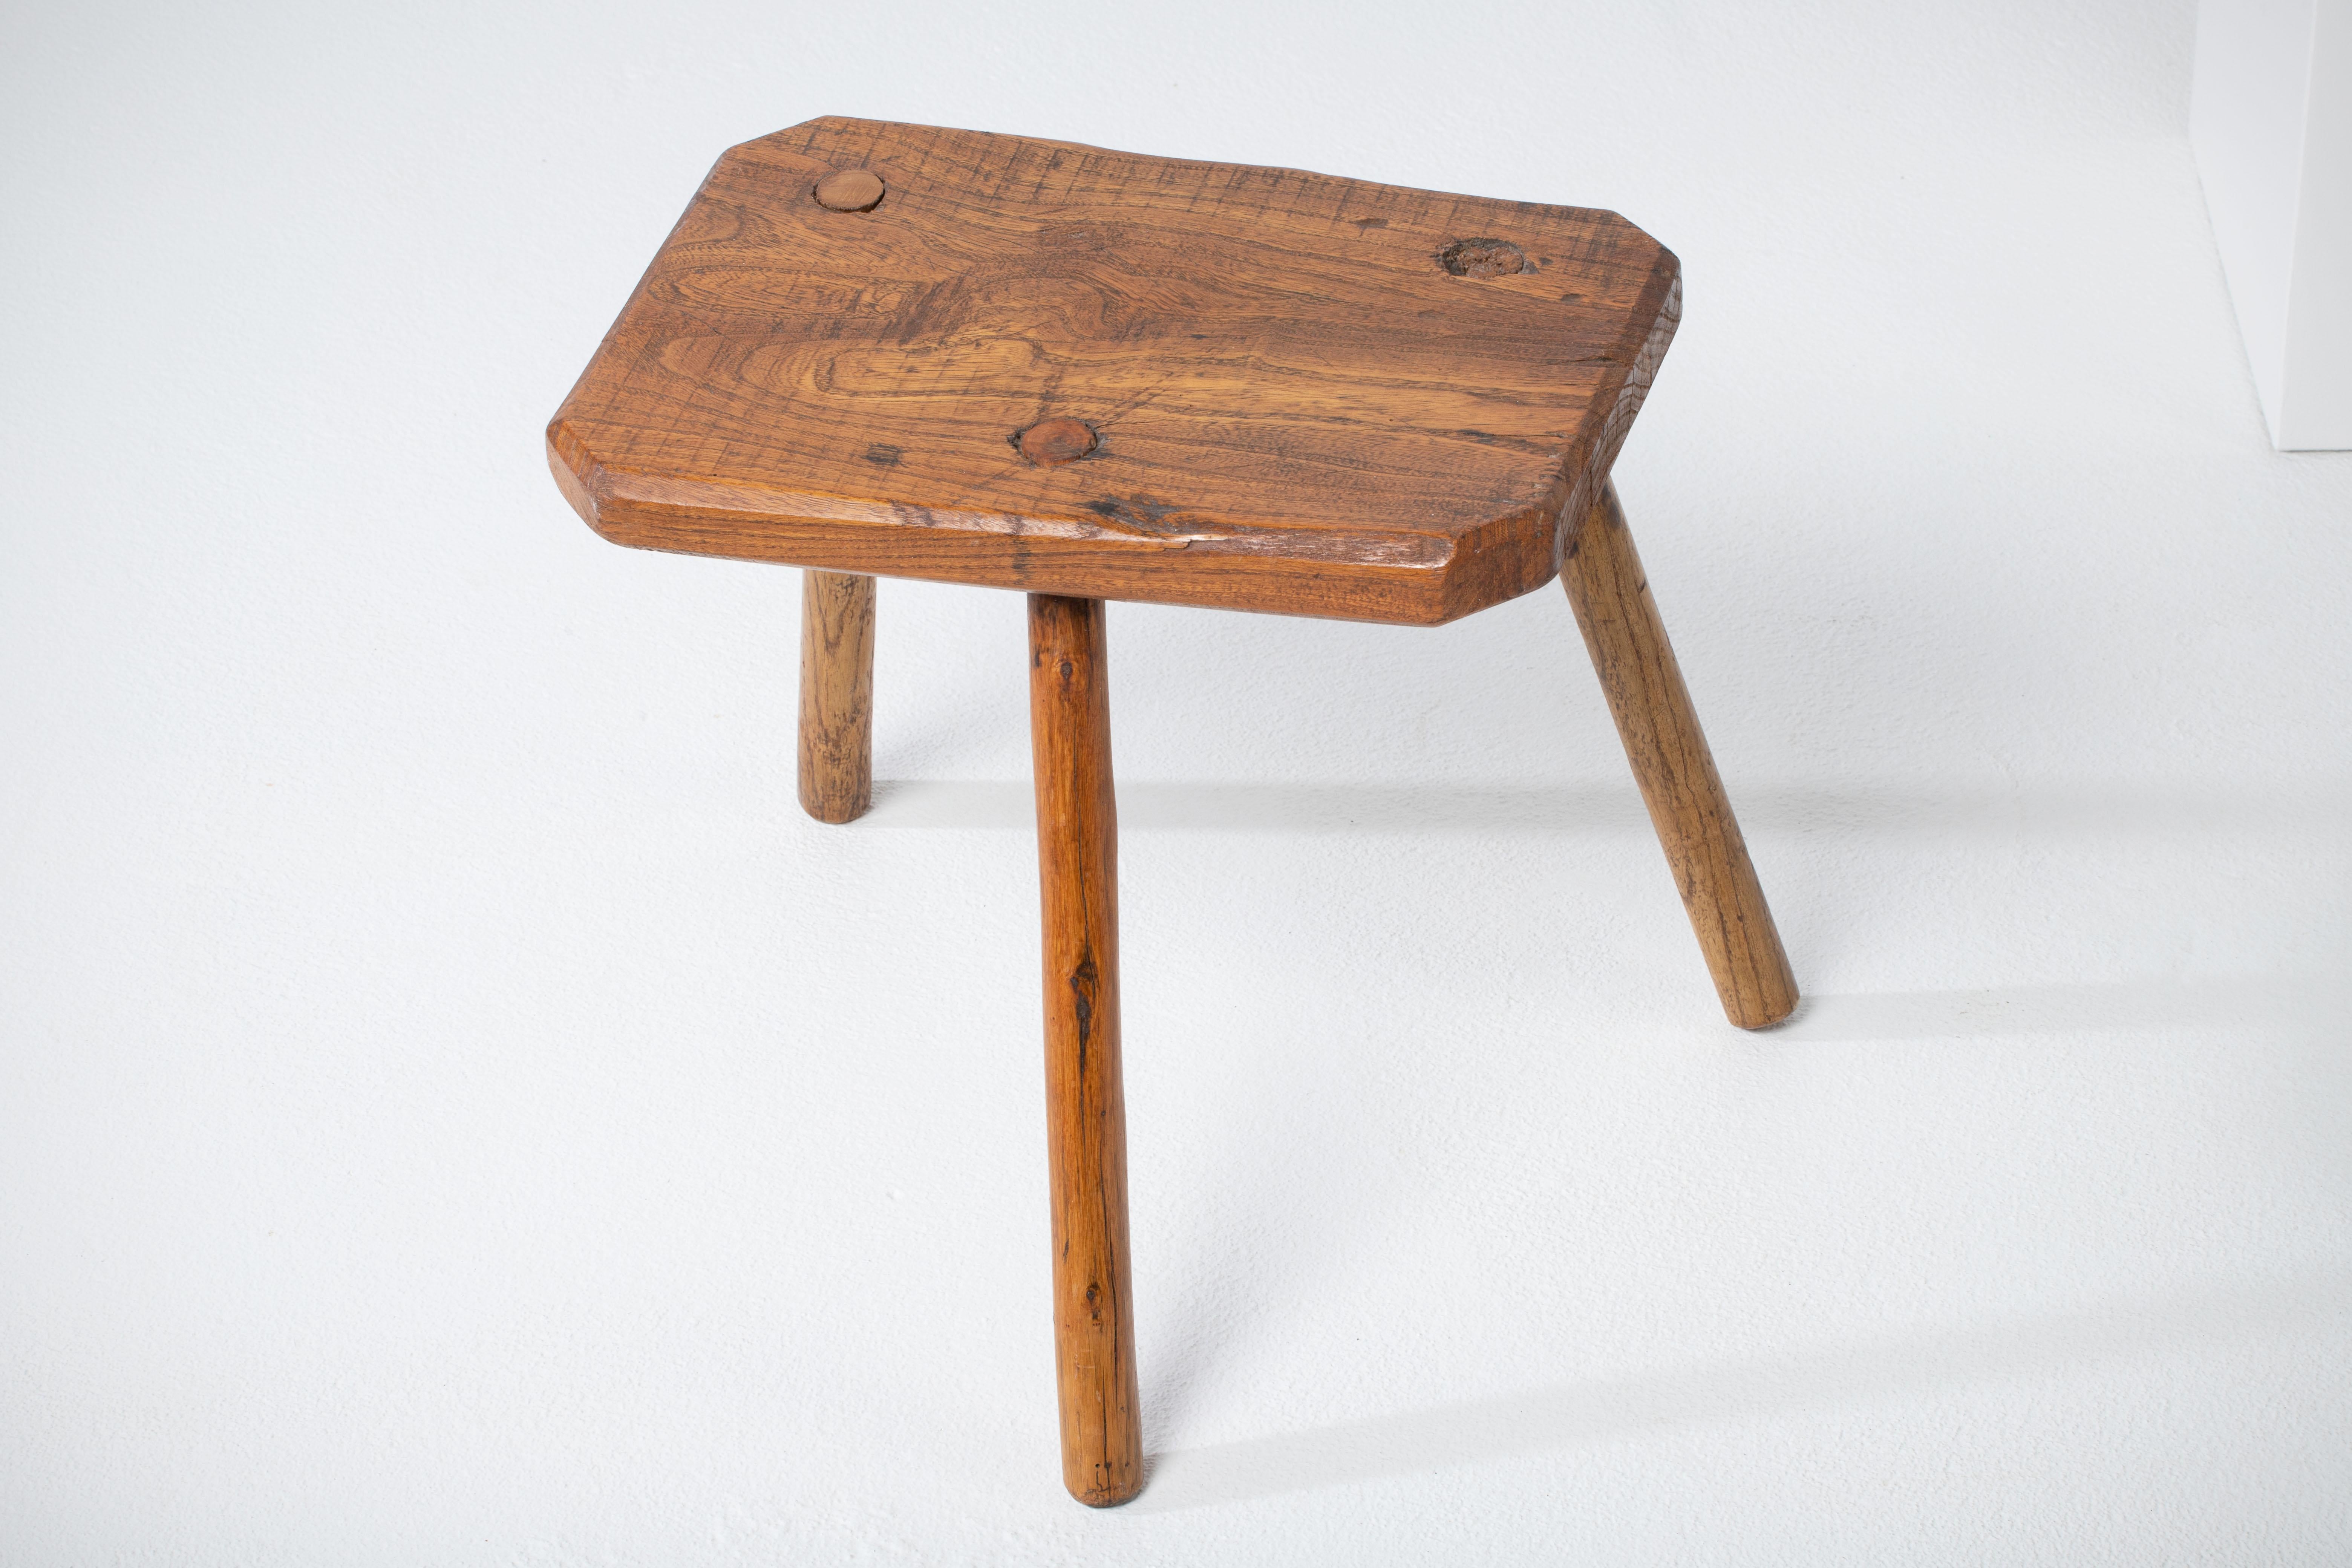 Fantastic wood stool from France. Made in the 1960s, no hardware. Lovely primitive look.
Good vintage condition.